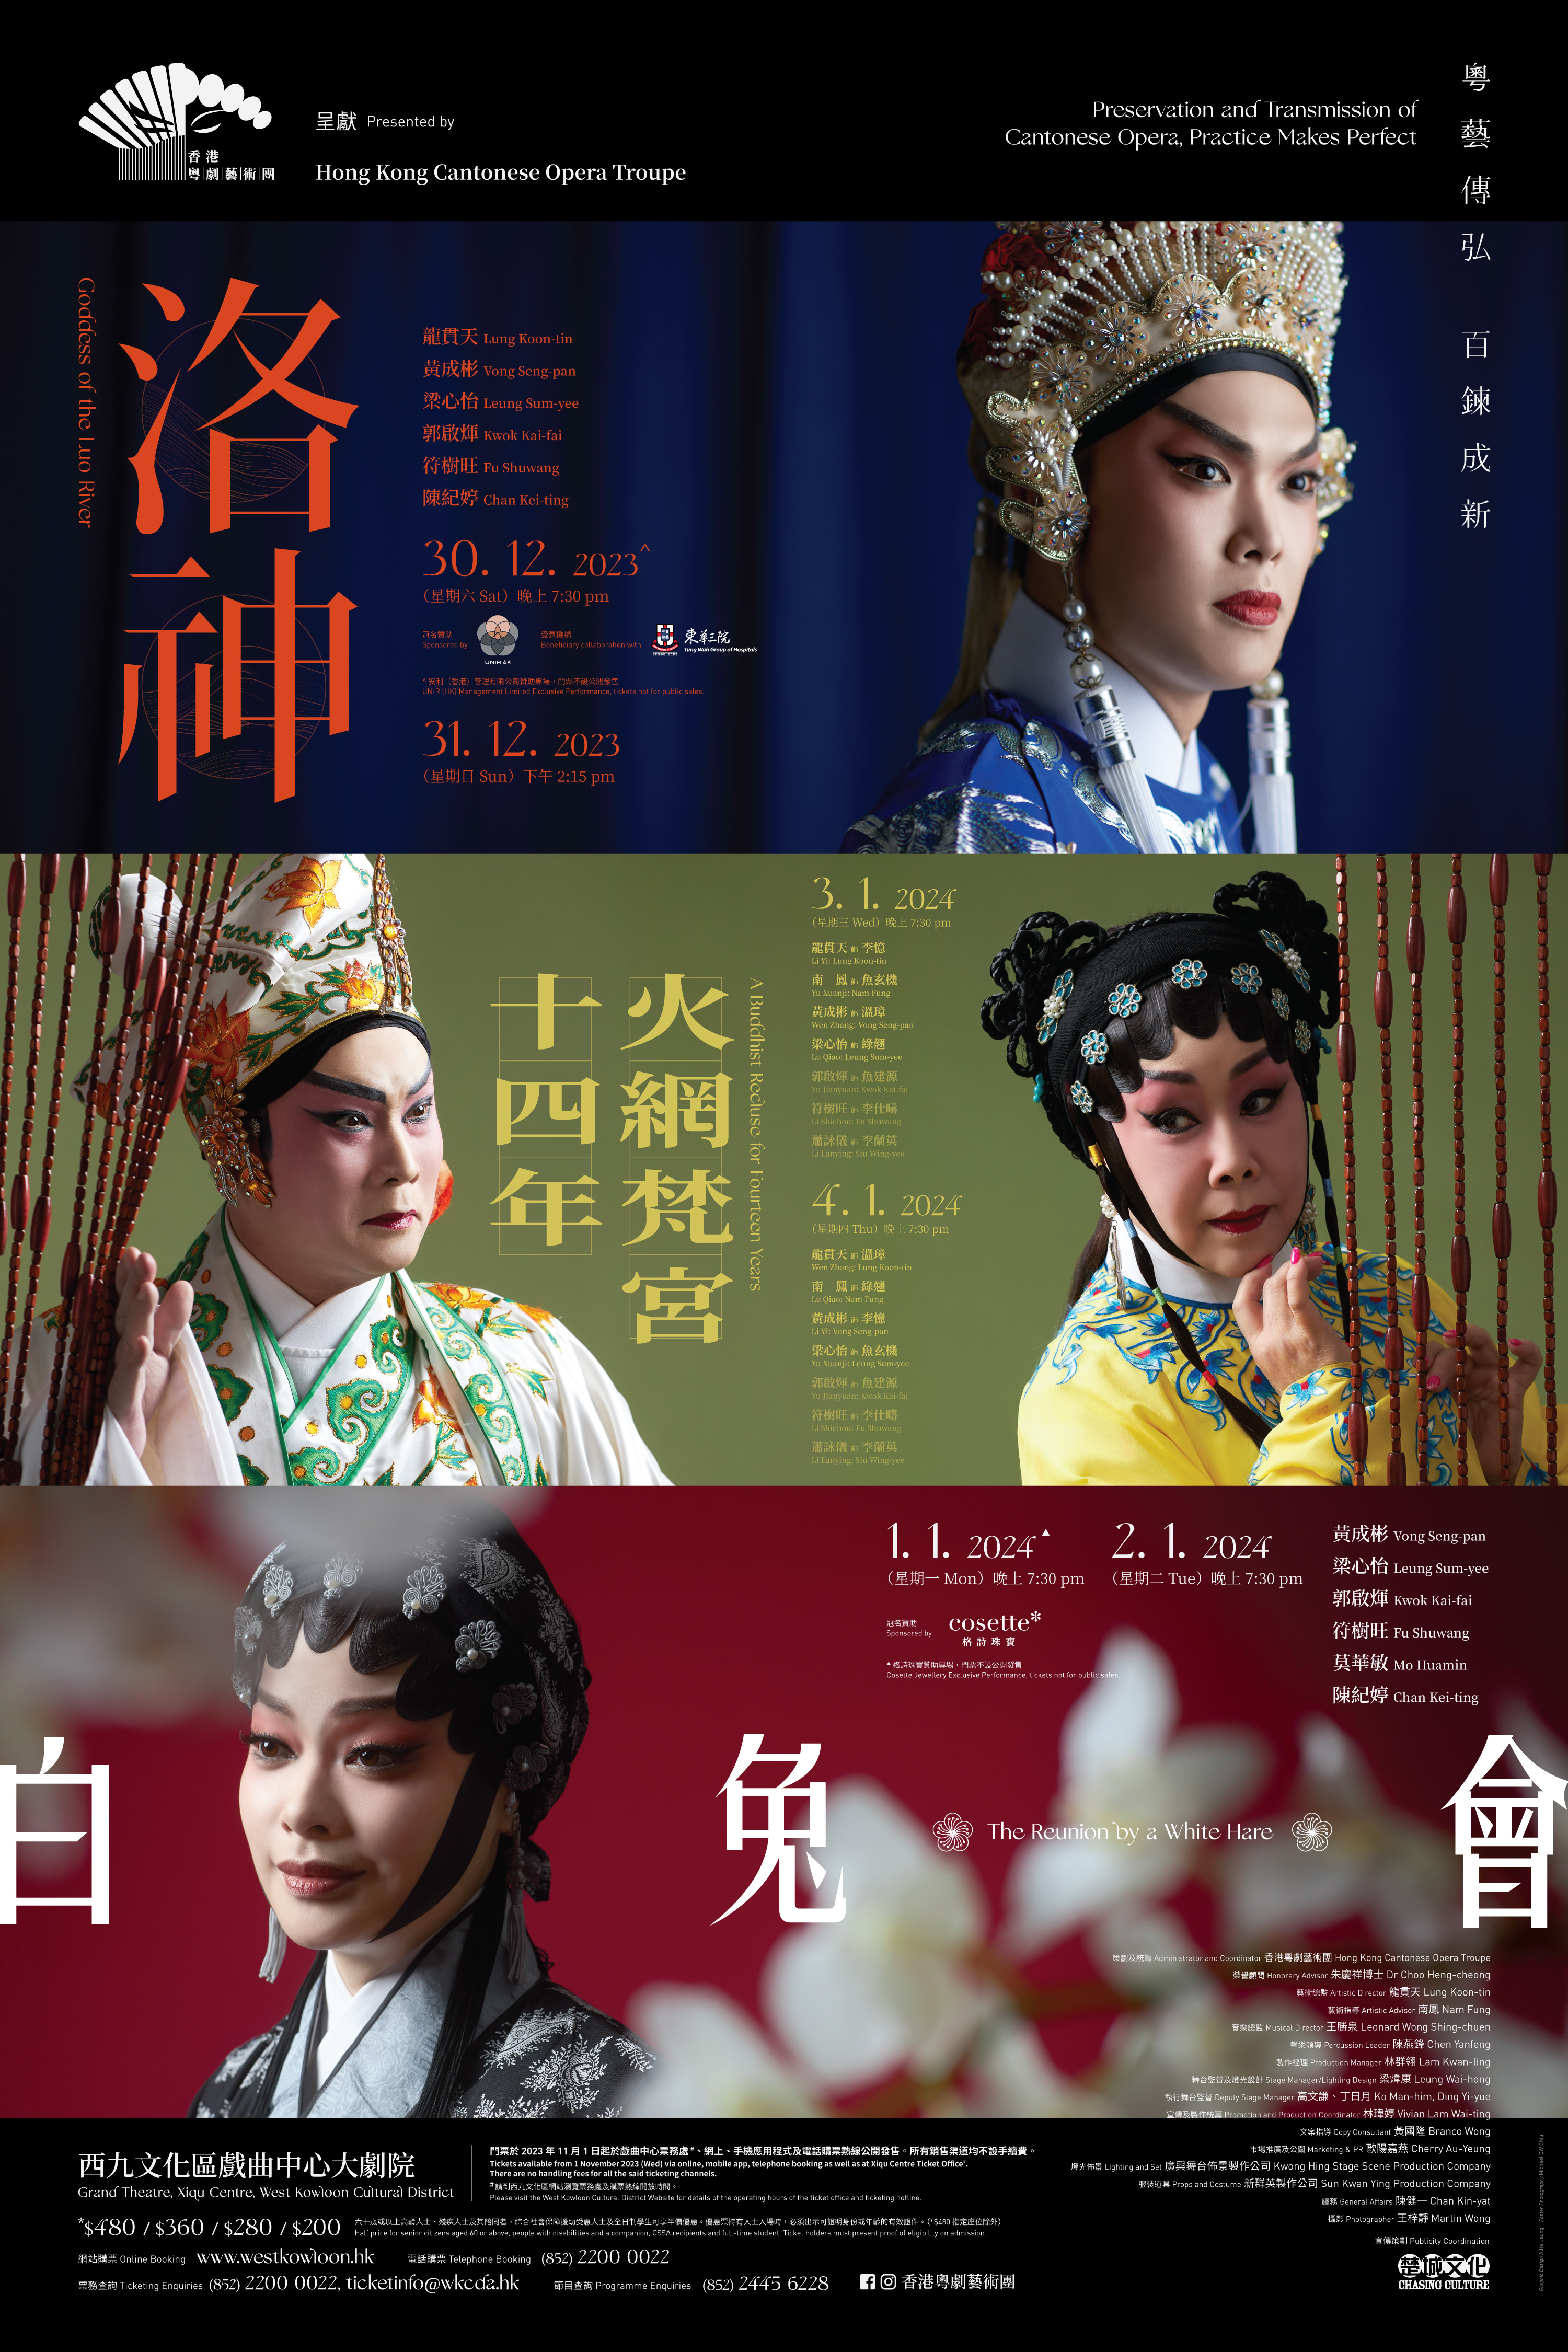 Preservation and Transmission of Cantonese Opera, Practice Makes Perfect             “Goddess of the Luo River”,“The Reunion by a White Hare”and“A Buddhist Recluse for Fourteen Years” Presented by Hong Kong Cantonese Opera Troupe